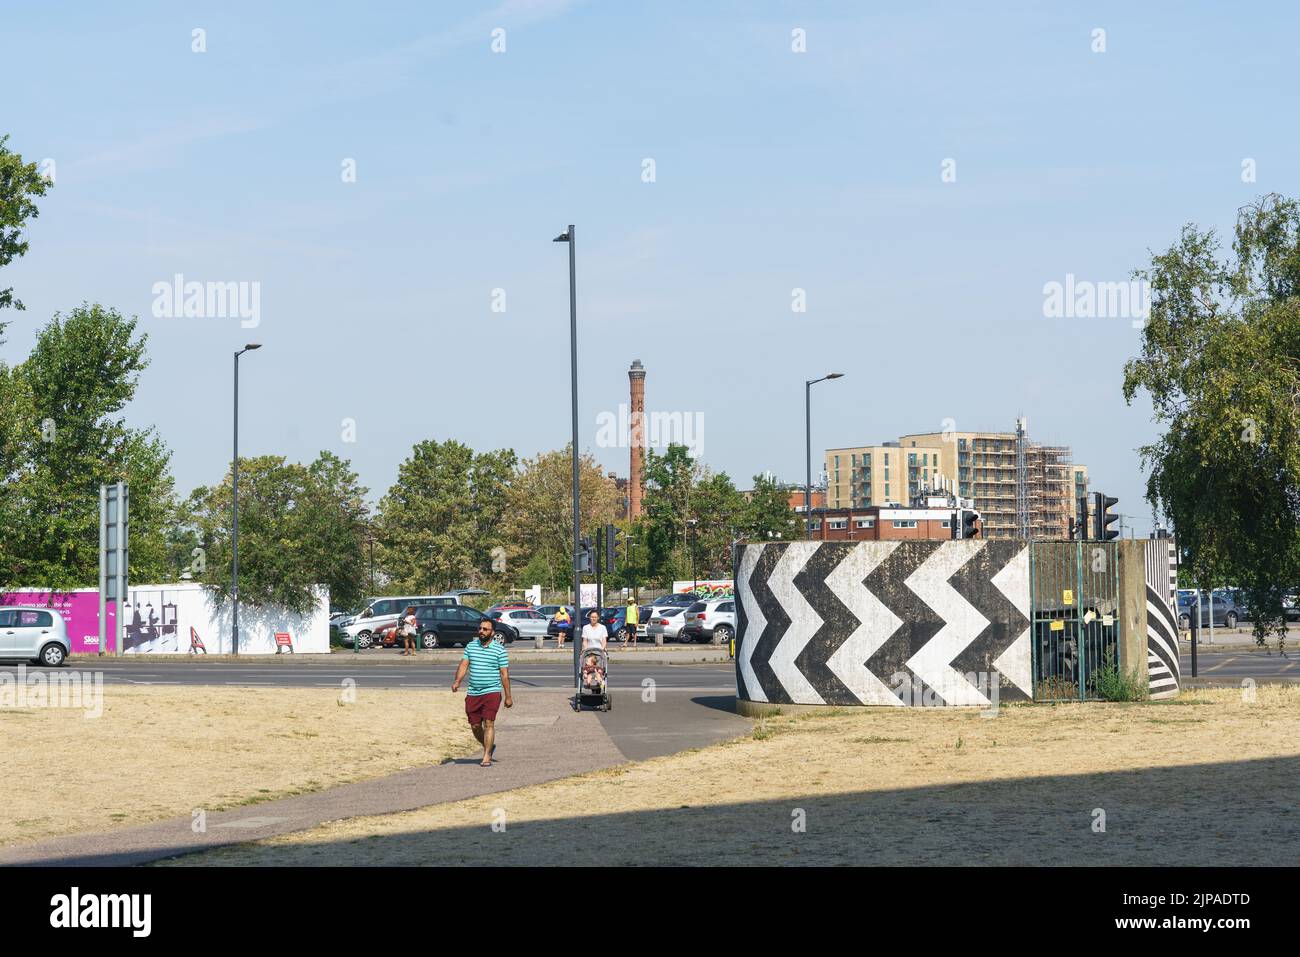 The iconic Horlicks Factory chimney can be seen from Slough town centre. Slough, Berkshire, UK. Urban redevelopment. Stock Photo